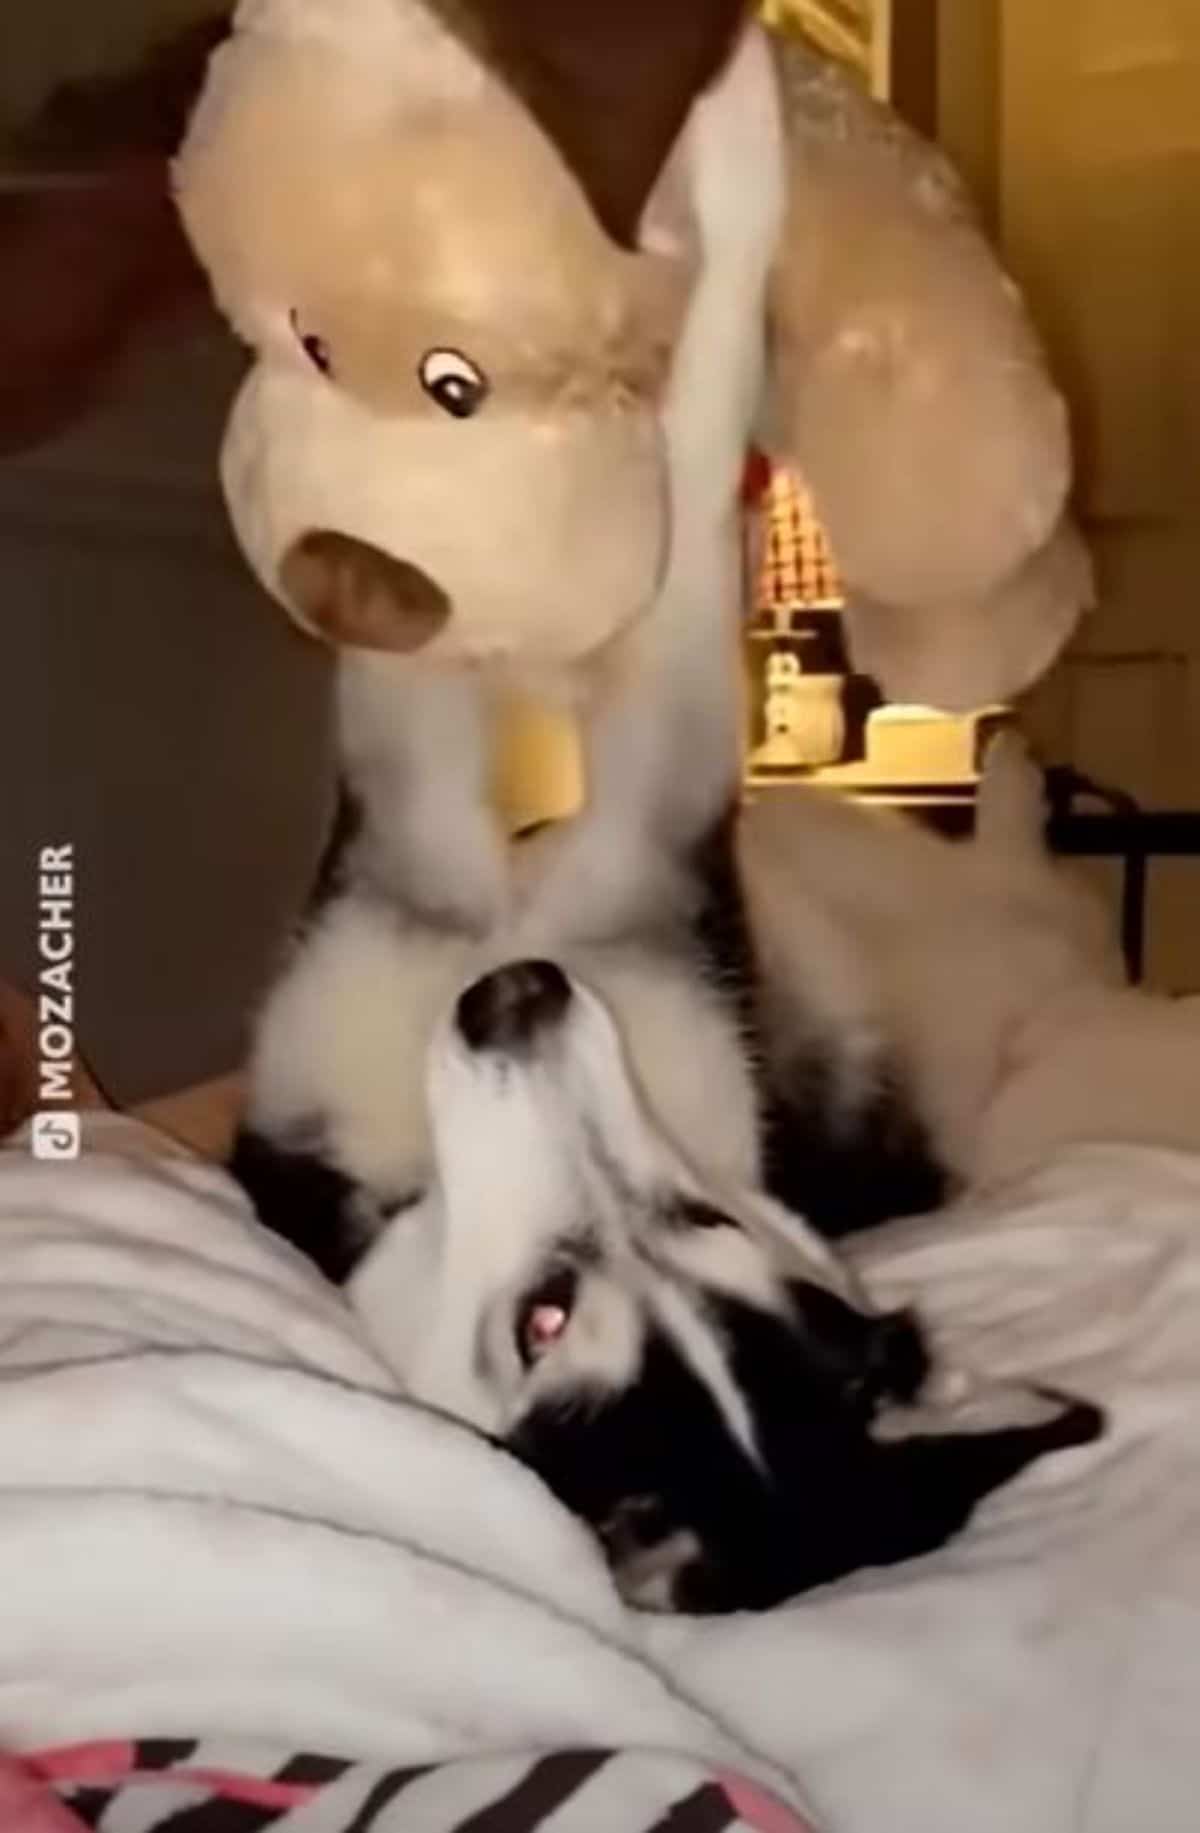 husky holding up a large brown teddy bear with the front legs laying on a bed